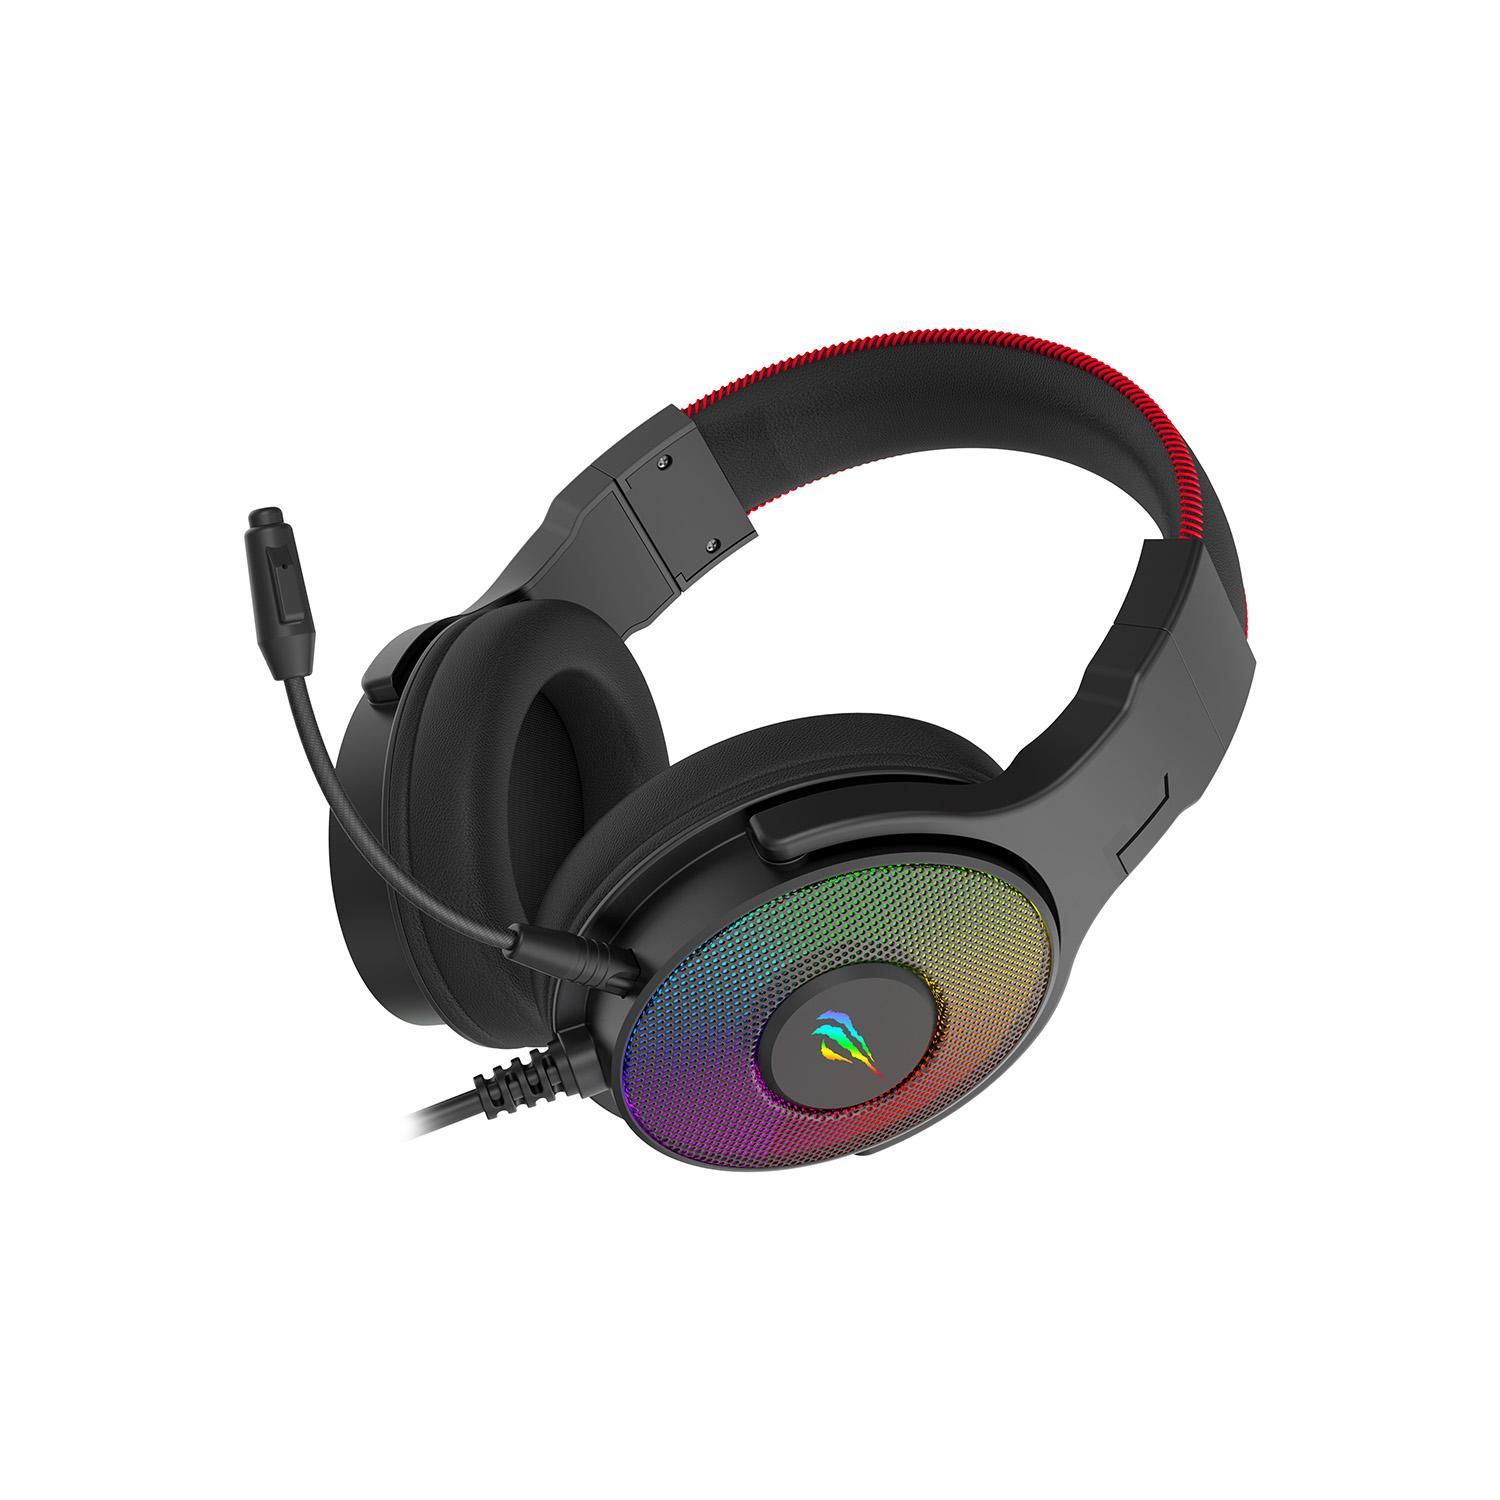 Gamenote 7.1 Surround Sound RGB Gaming USB Heaset with HD Microphone